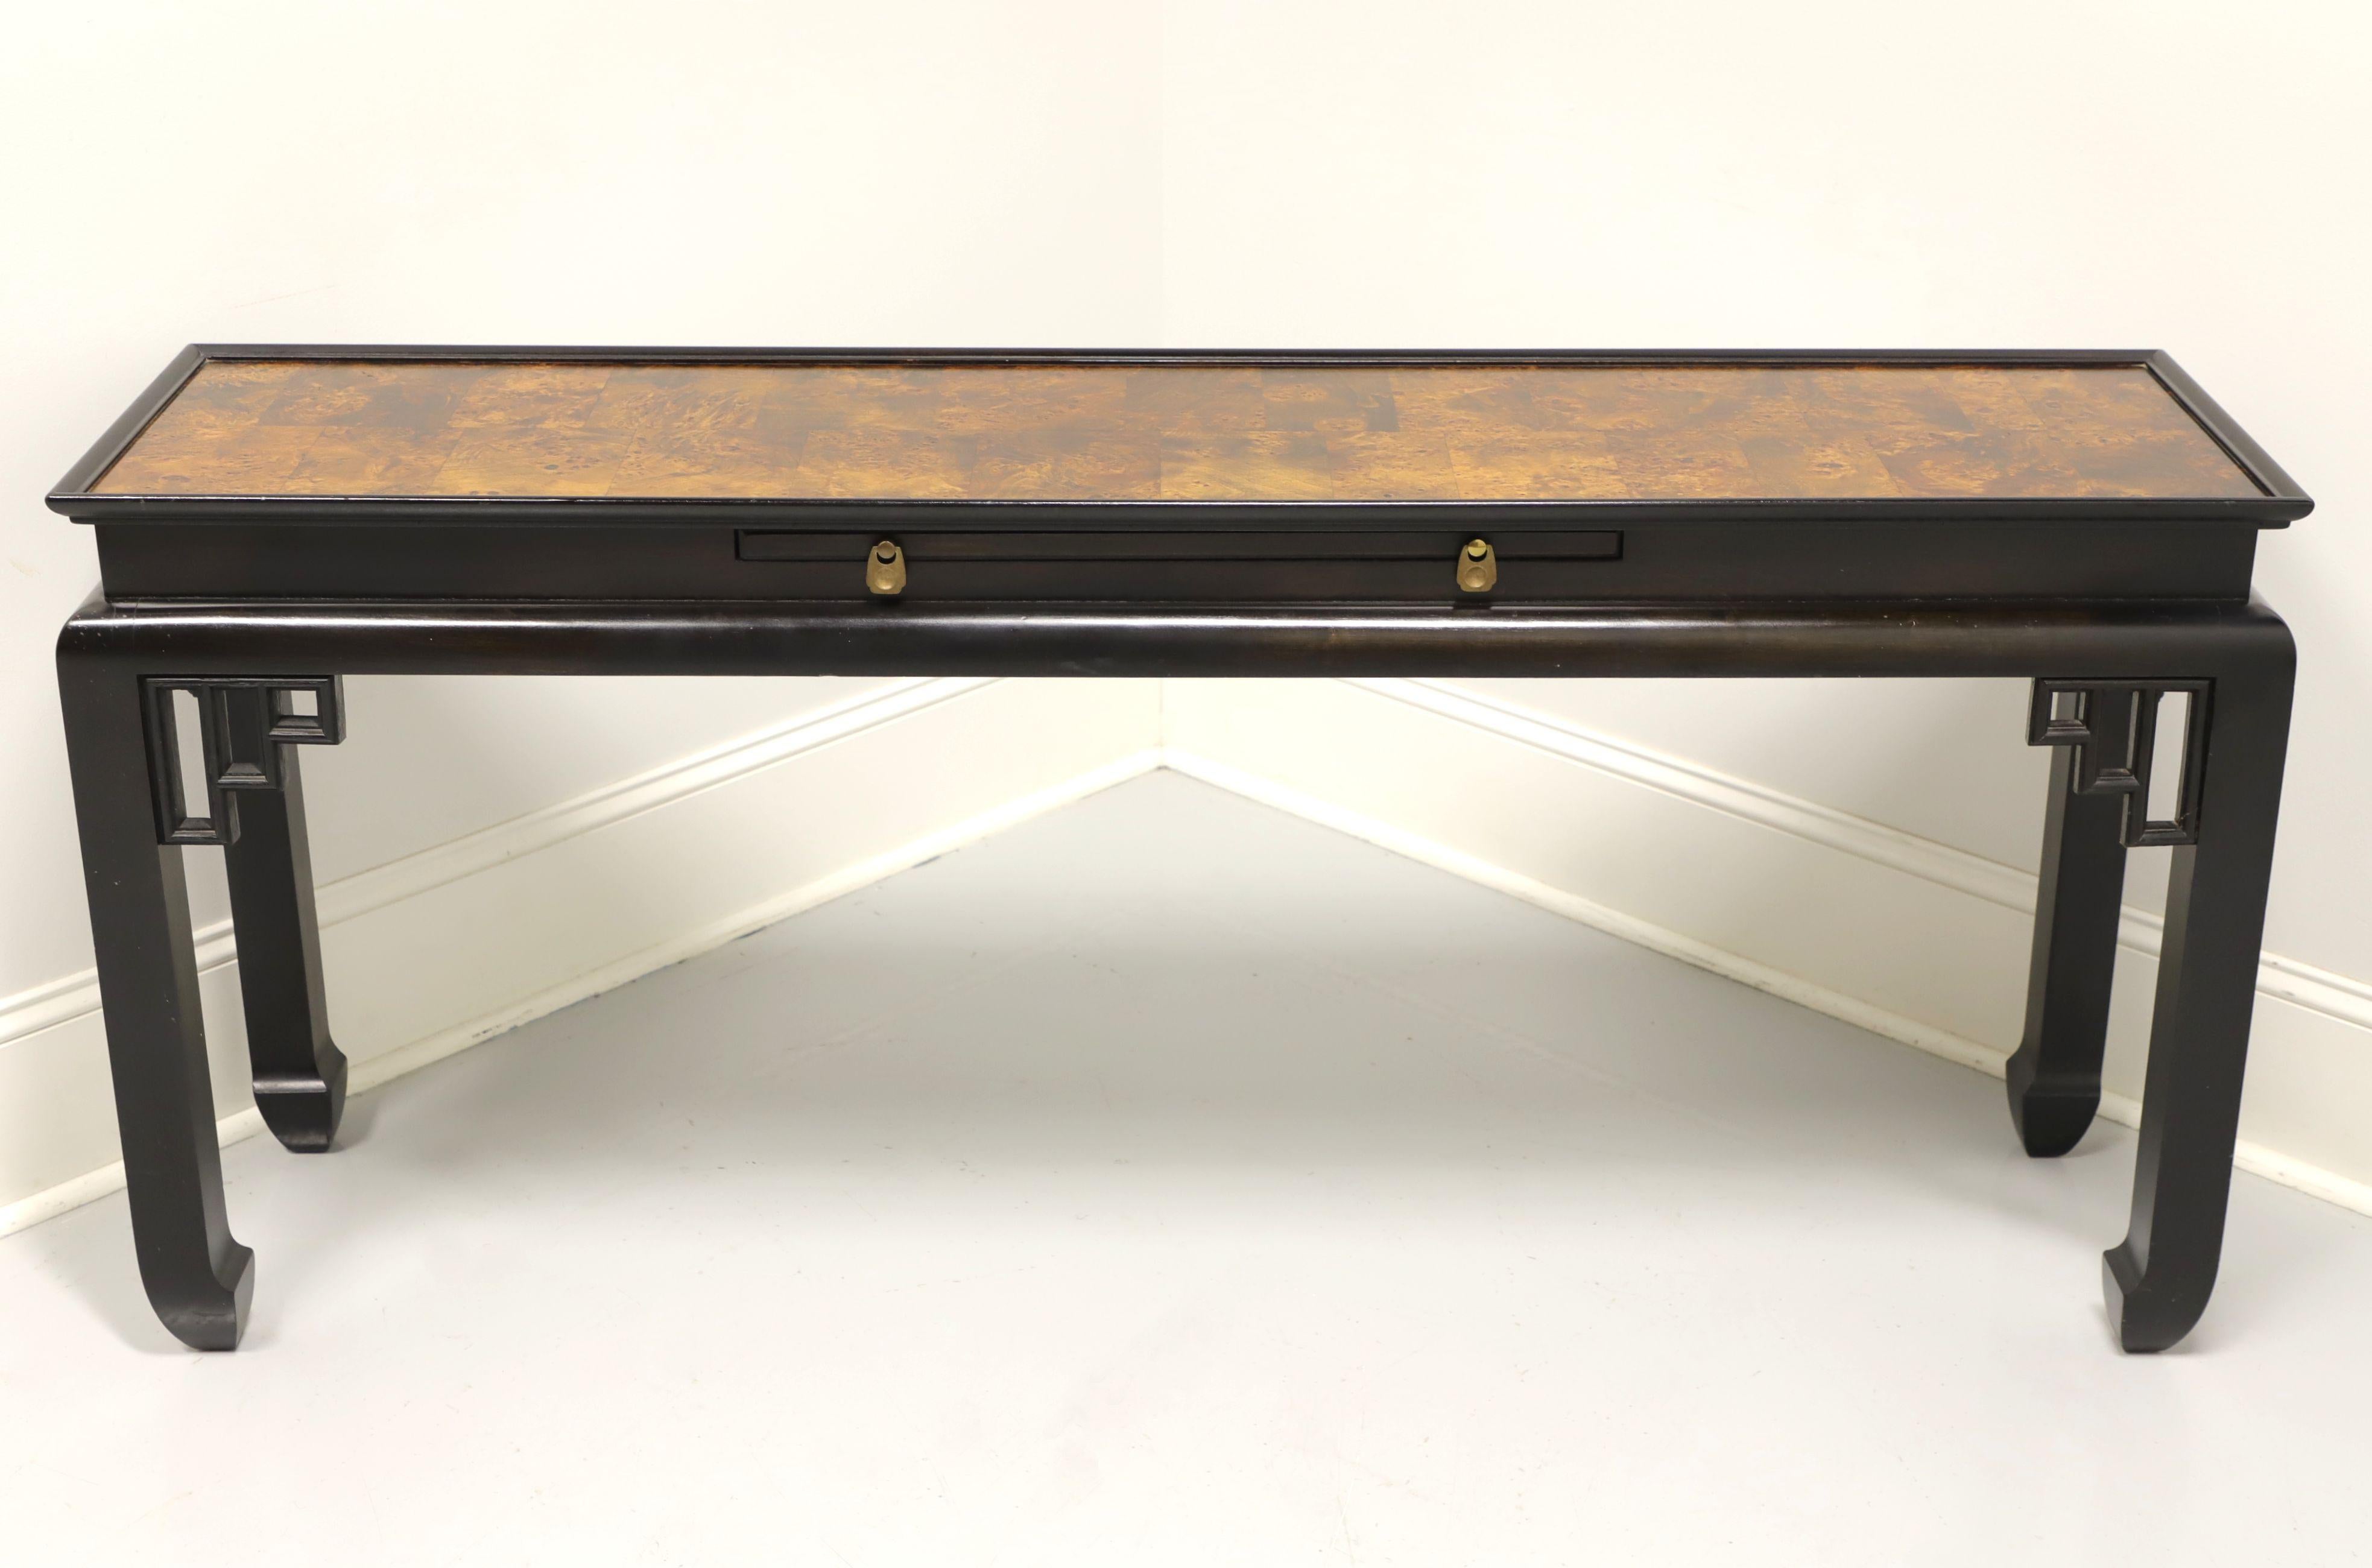 An Asian inspired console table by Ethan Allen. Solid hardwood with black lacquer, burl elm top, brass hardware and curved inward spade feet. Features decorative fretwork to corners and a center pull out tray. Made in the USA, in the late 20th